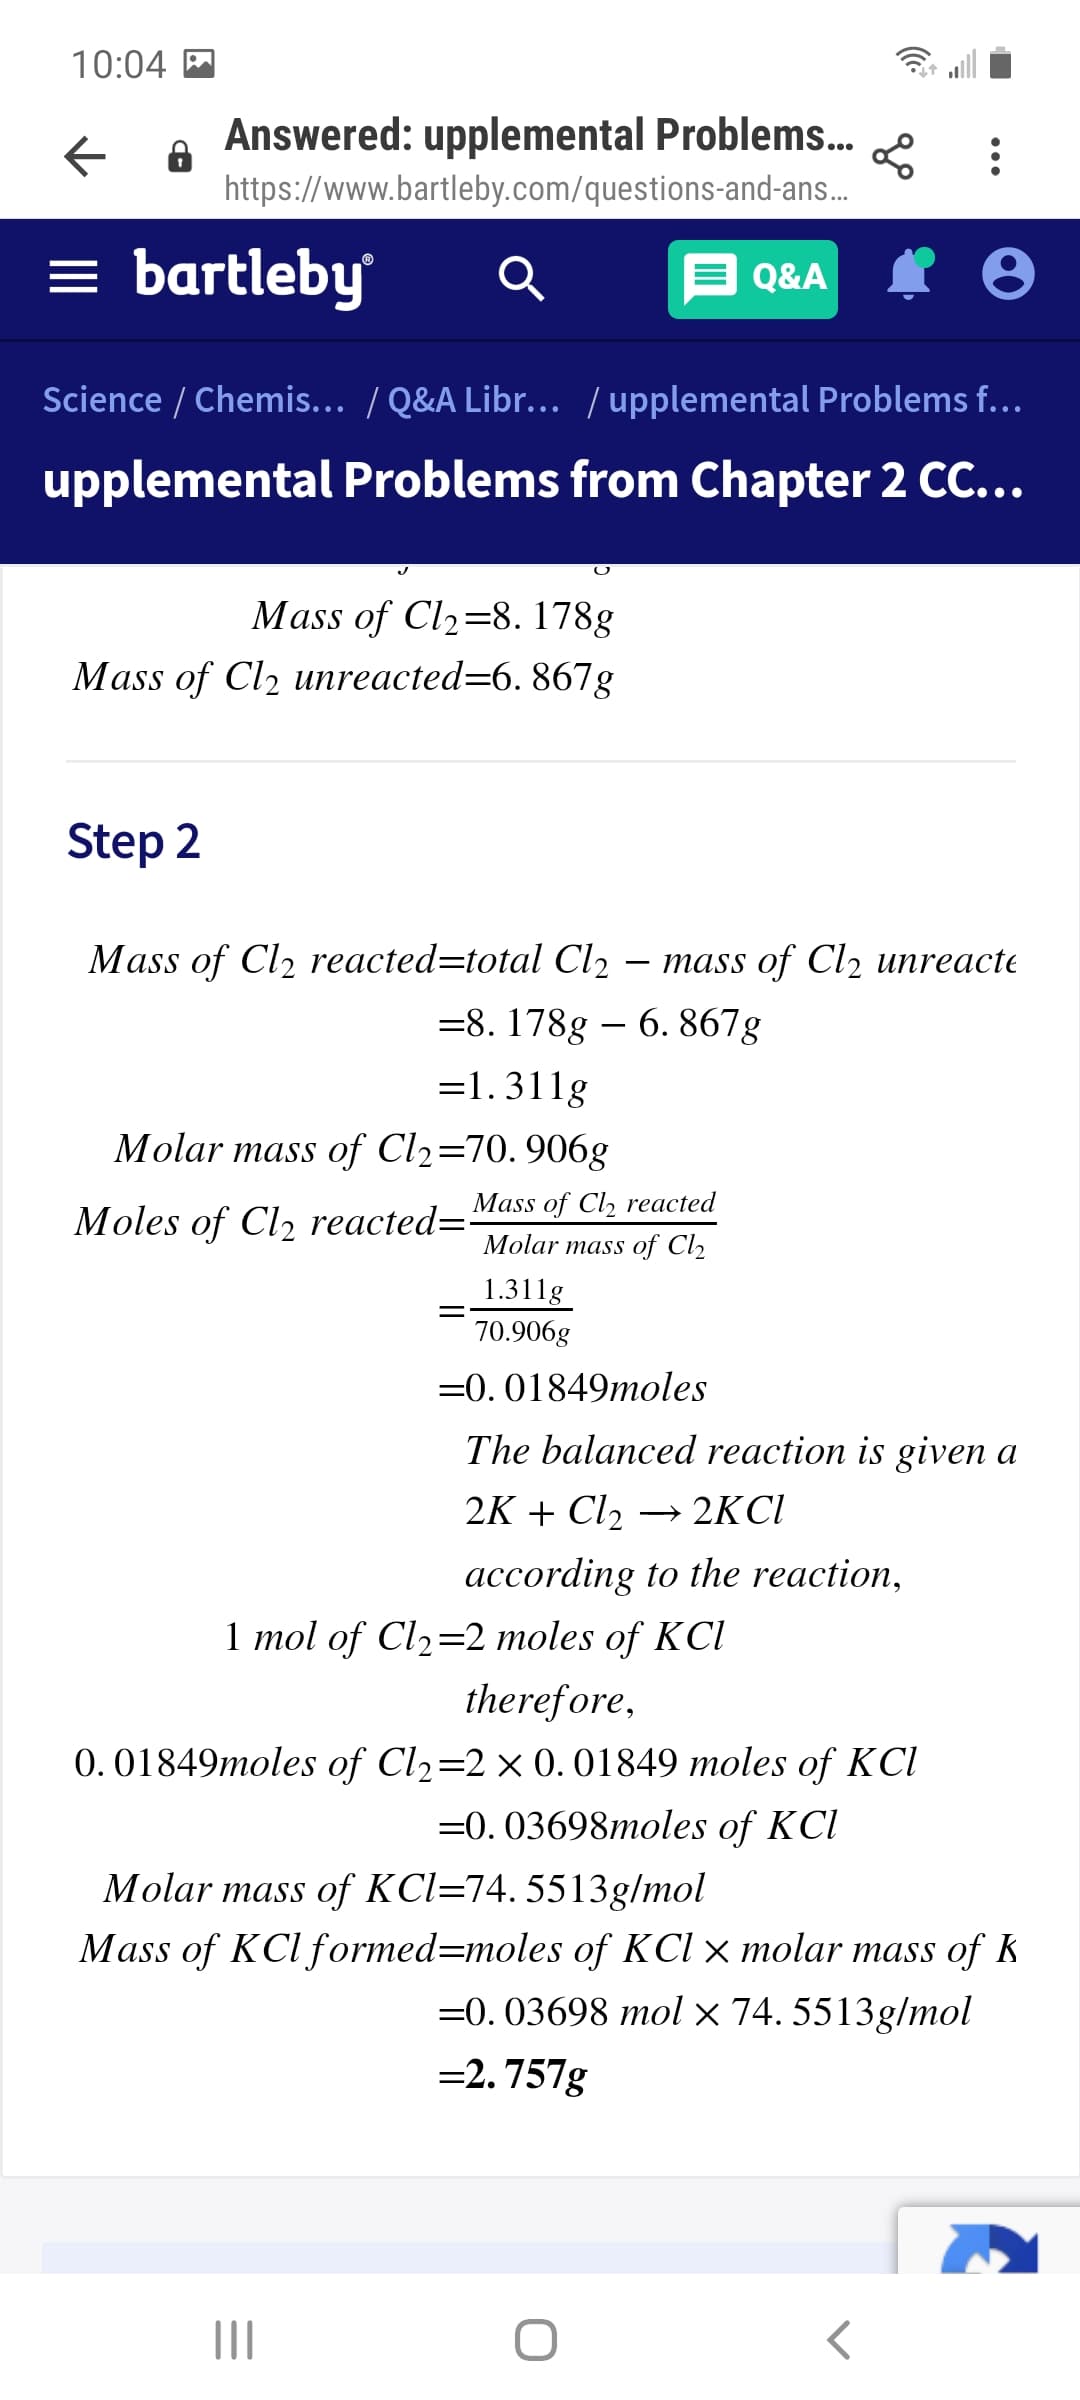 10:04 M
Answered: upplemental Problems.
https://www.bartleby.com/questions-and-ans..
= bartleby
A Q&A I 0
Science / Chemis... / Q&A Libr... / upplemental Problems f...
upplemental Problems from Chapter 2 CC...
Mass of Cl2=8. 178g
Mass of Cl2 unreacted=6. 867g
Step 2
Mass of Cl2 reacted=total Cl2
тass of Clz иnreacte
=8. 178g – 6. 867g
=1.311g
Molar mass of Cl2=70. 906g
Mass of Cl, reacted
Moles of Cl2 reacted="
Molar mass of Cl2
1.311g
70.906g
=0. 01849moles
The balanced reaction is given a
2K + Cl2
→ 2KCI
according to the reaction,
1 mol of Cl2=2 moles of KCl
therefore,
0. 01849moles of Cl2=2× 0.01849 moles of KCI
=0. 03698moles of KCl
Molar mass of KCl=74. 5513g/mol
Mass of KCl formed=moles of KCl × molar mass of k
=0. 03698 mol × 74. 5513g/mol
=2. 757g
II
